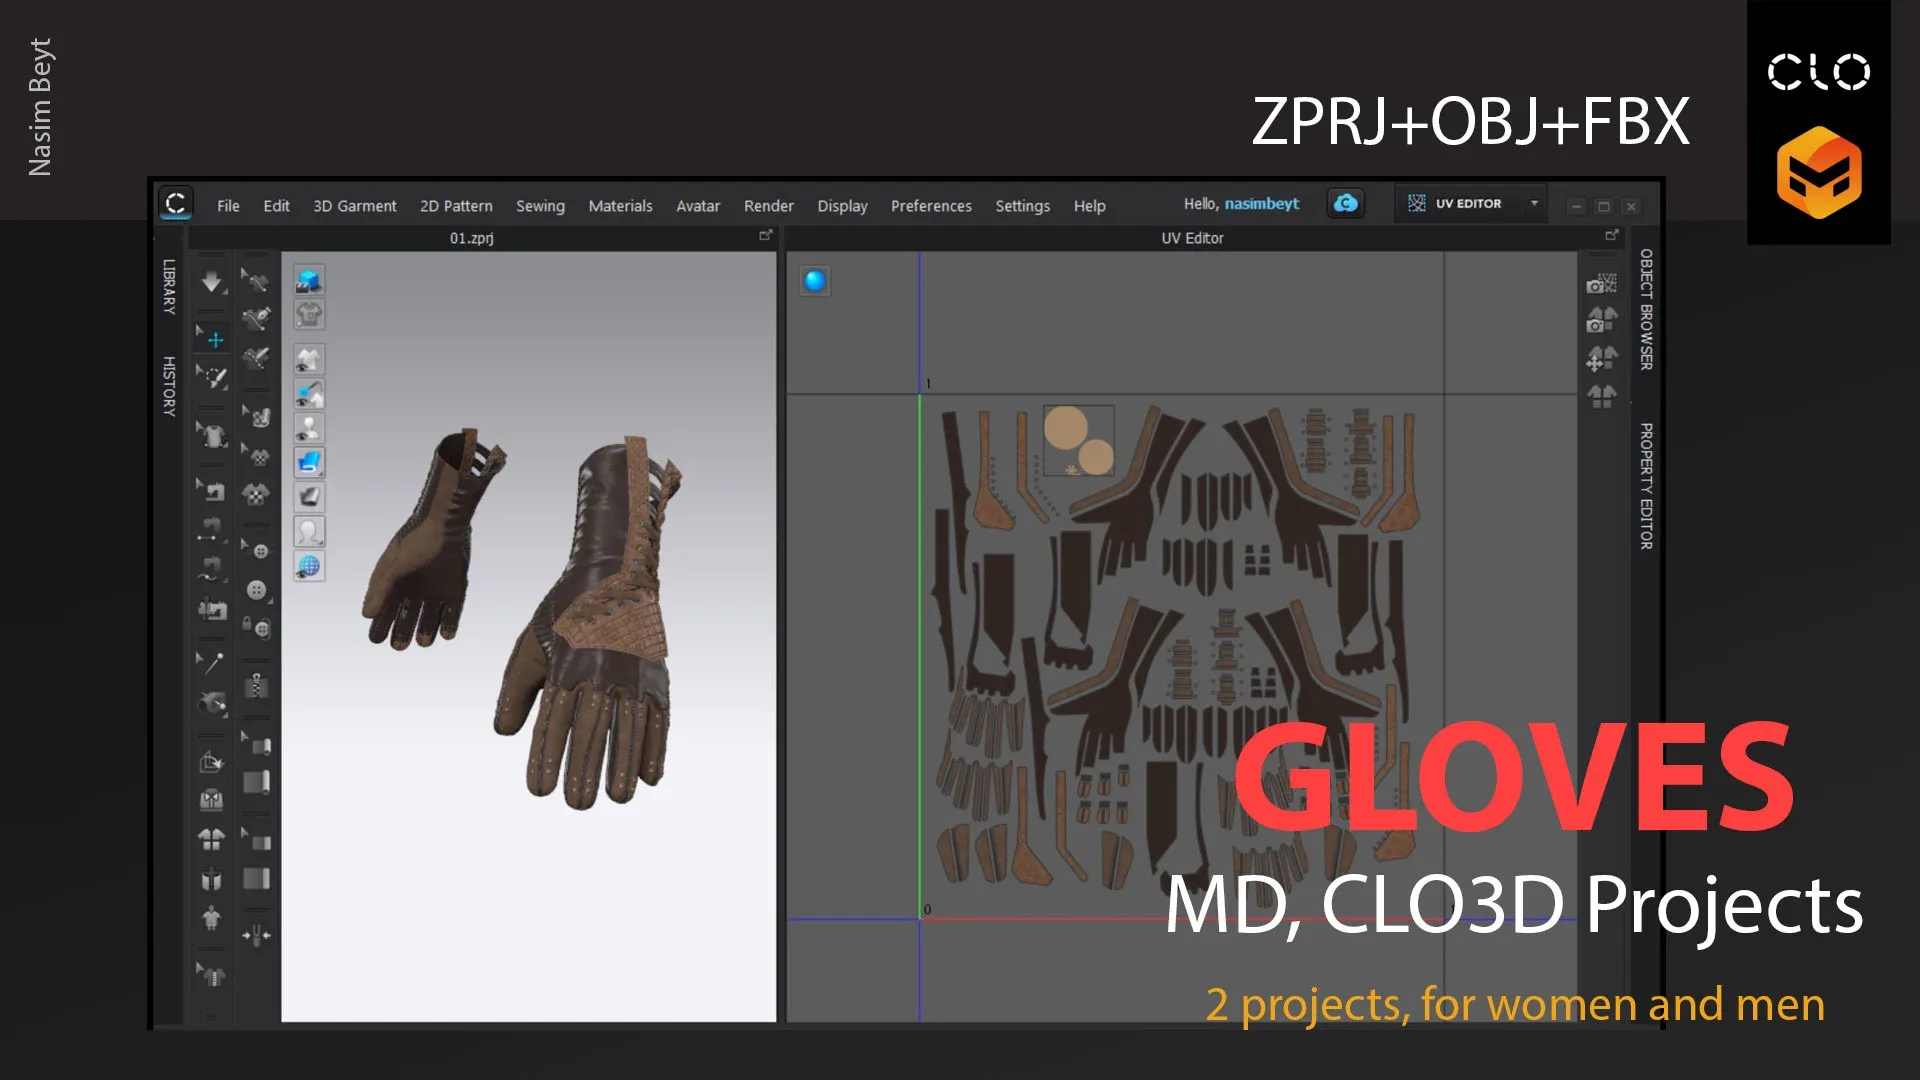 Women's and Men's Gloves. CLO3D, MD PROJECTS+OBJ+FBX